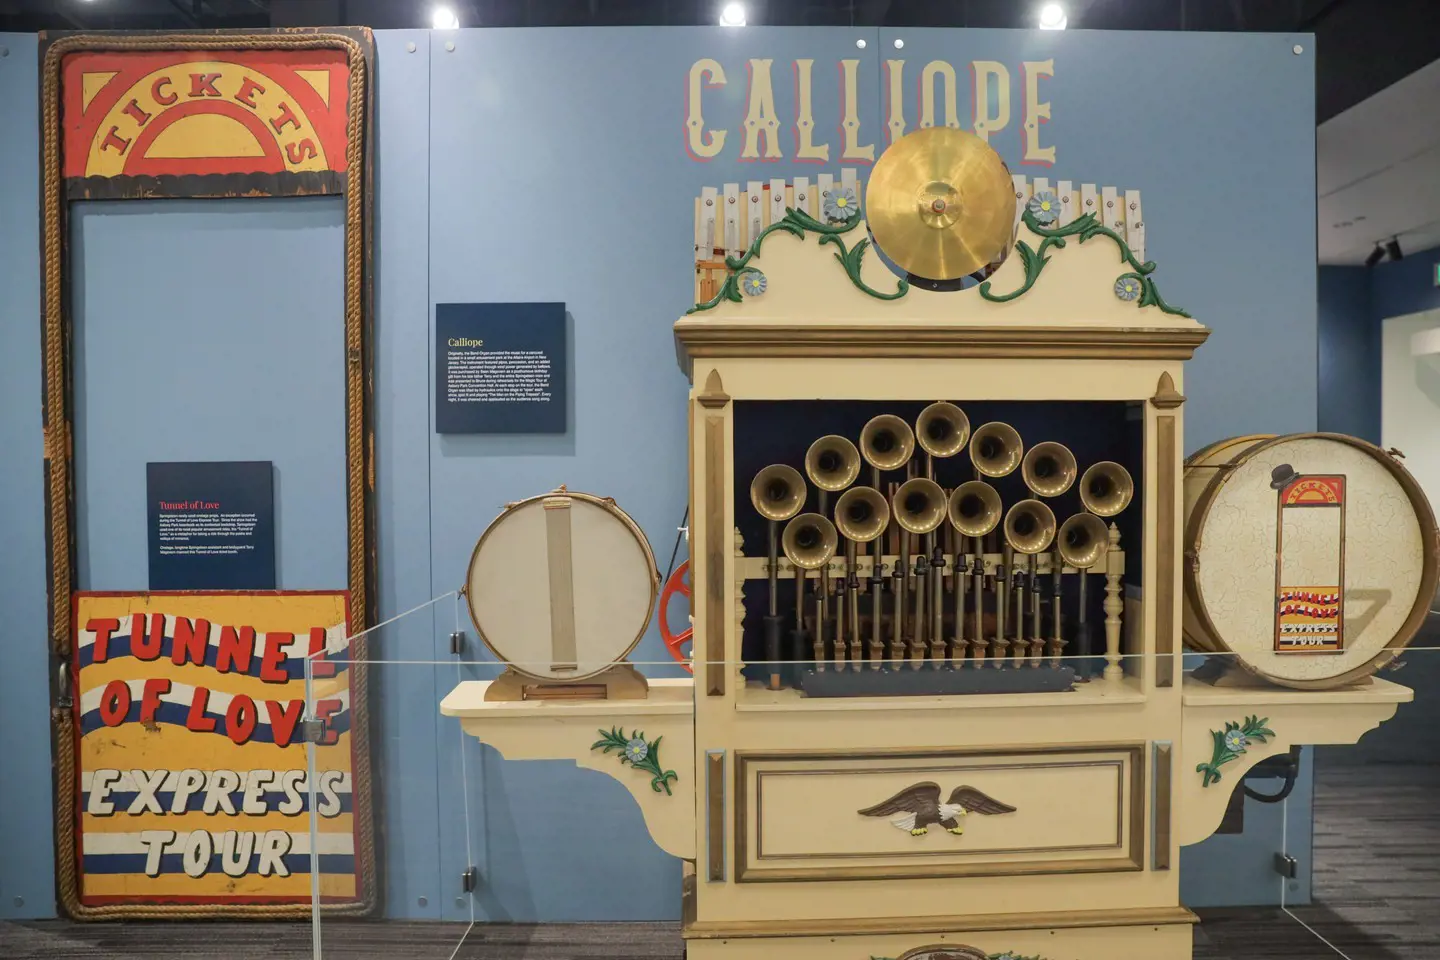 Calliope on display at the Grammy Museum.